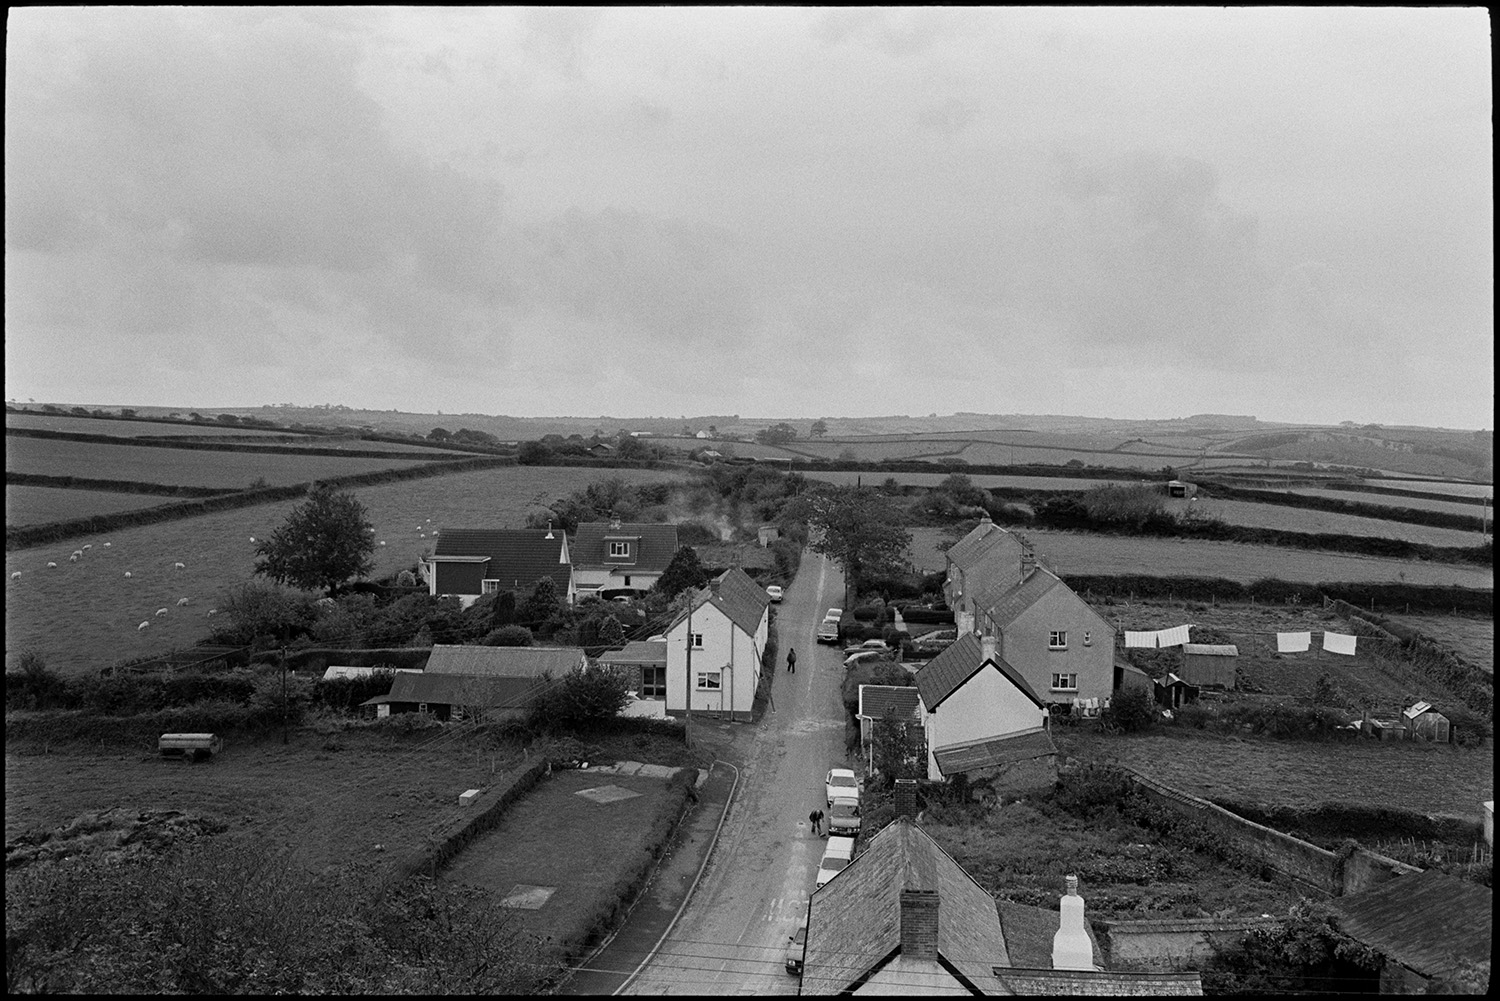 View from church tower. 
[A view of houses, a road and surrounding fields at Atherington, taken from Atherington Church tower.]